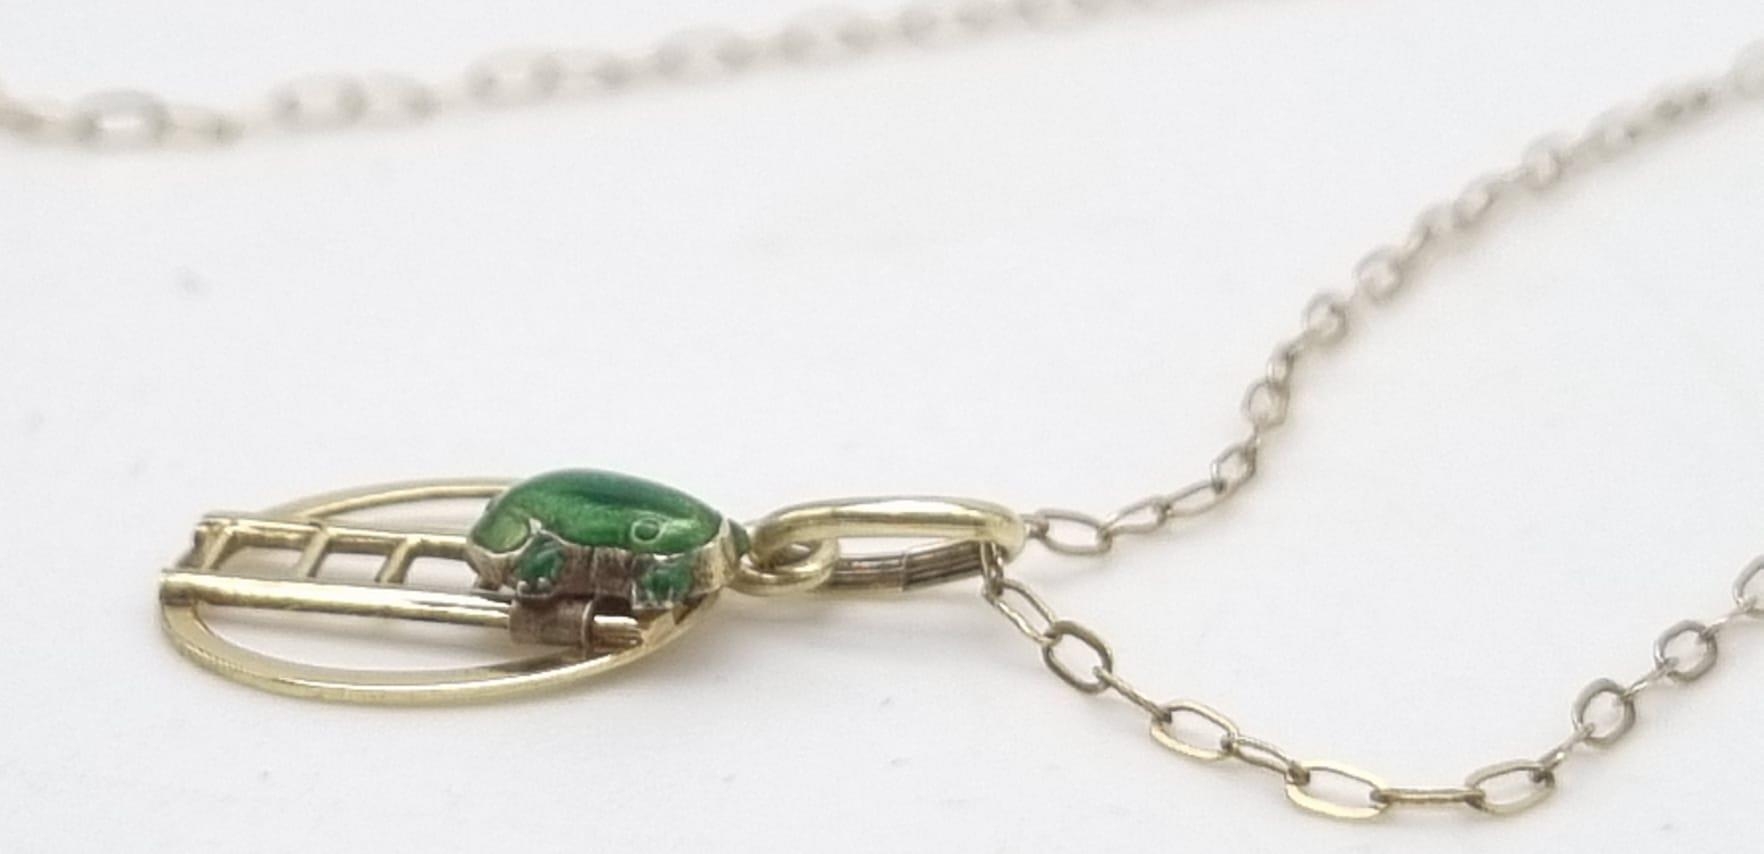 A 9K Yellow Gold Disappearing Necklace with Frog and Ladder Pendant. 44cm. 0.83g - Image 3 of 6